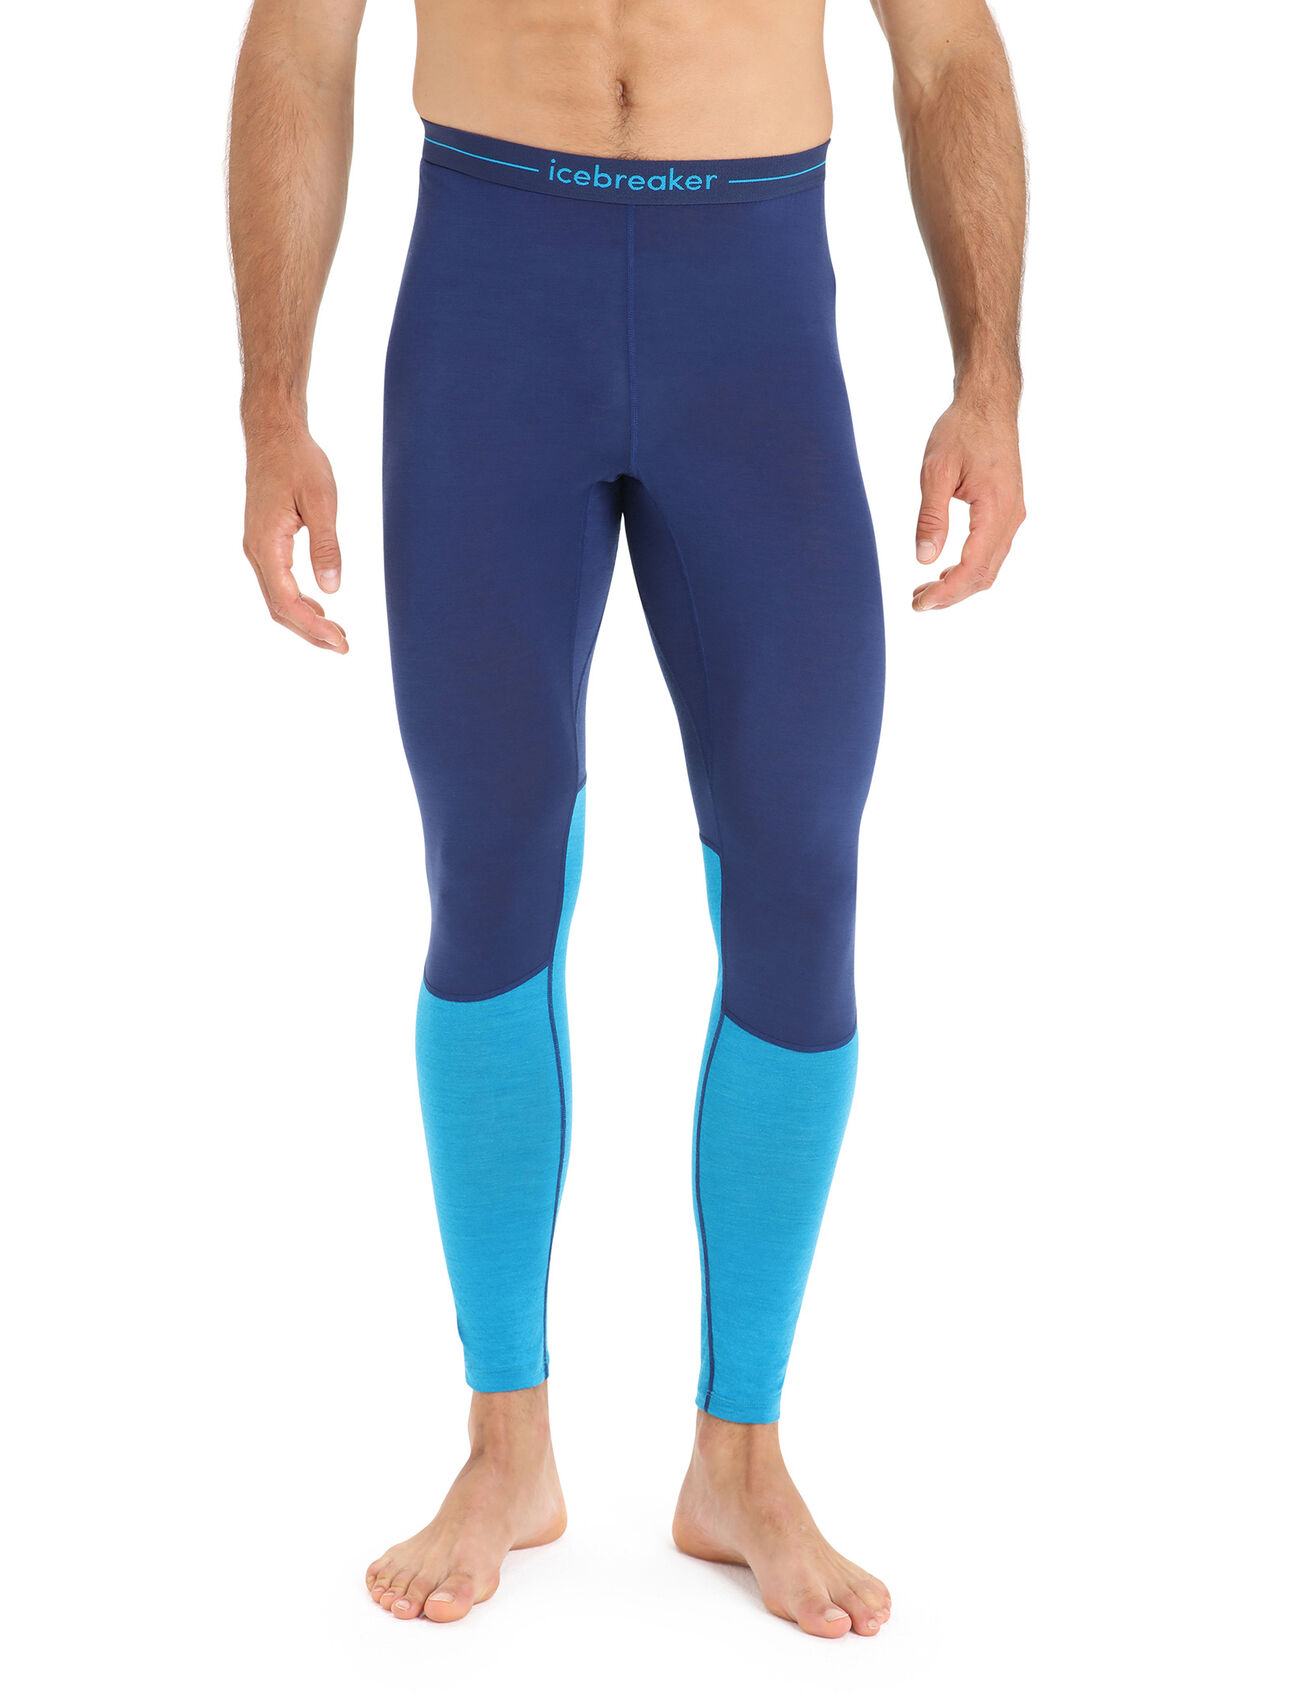 Mens 125 ZoneKnit™ Merino Thermal Leggings Ultralight merino base layer bottoms designed to help regulate body temperature during high-intensity activity, the 125 ZoneKnit™ Leggings feature our jersey Cool-Lite™ fabric for adventure and everyday training.